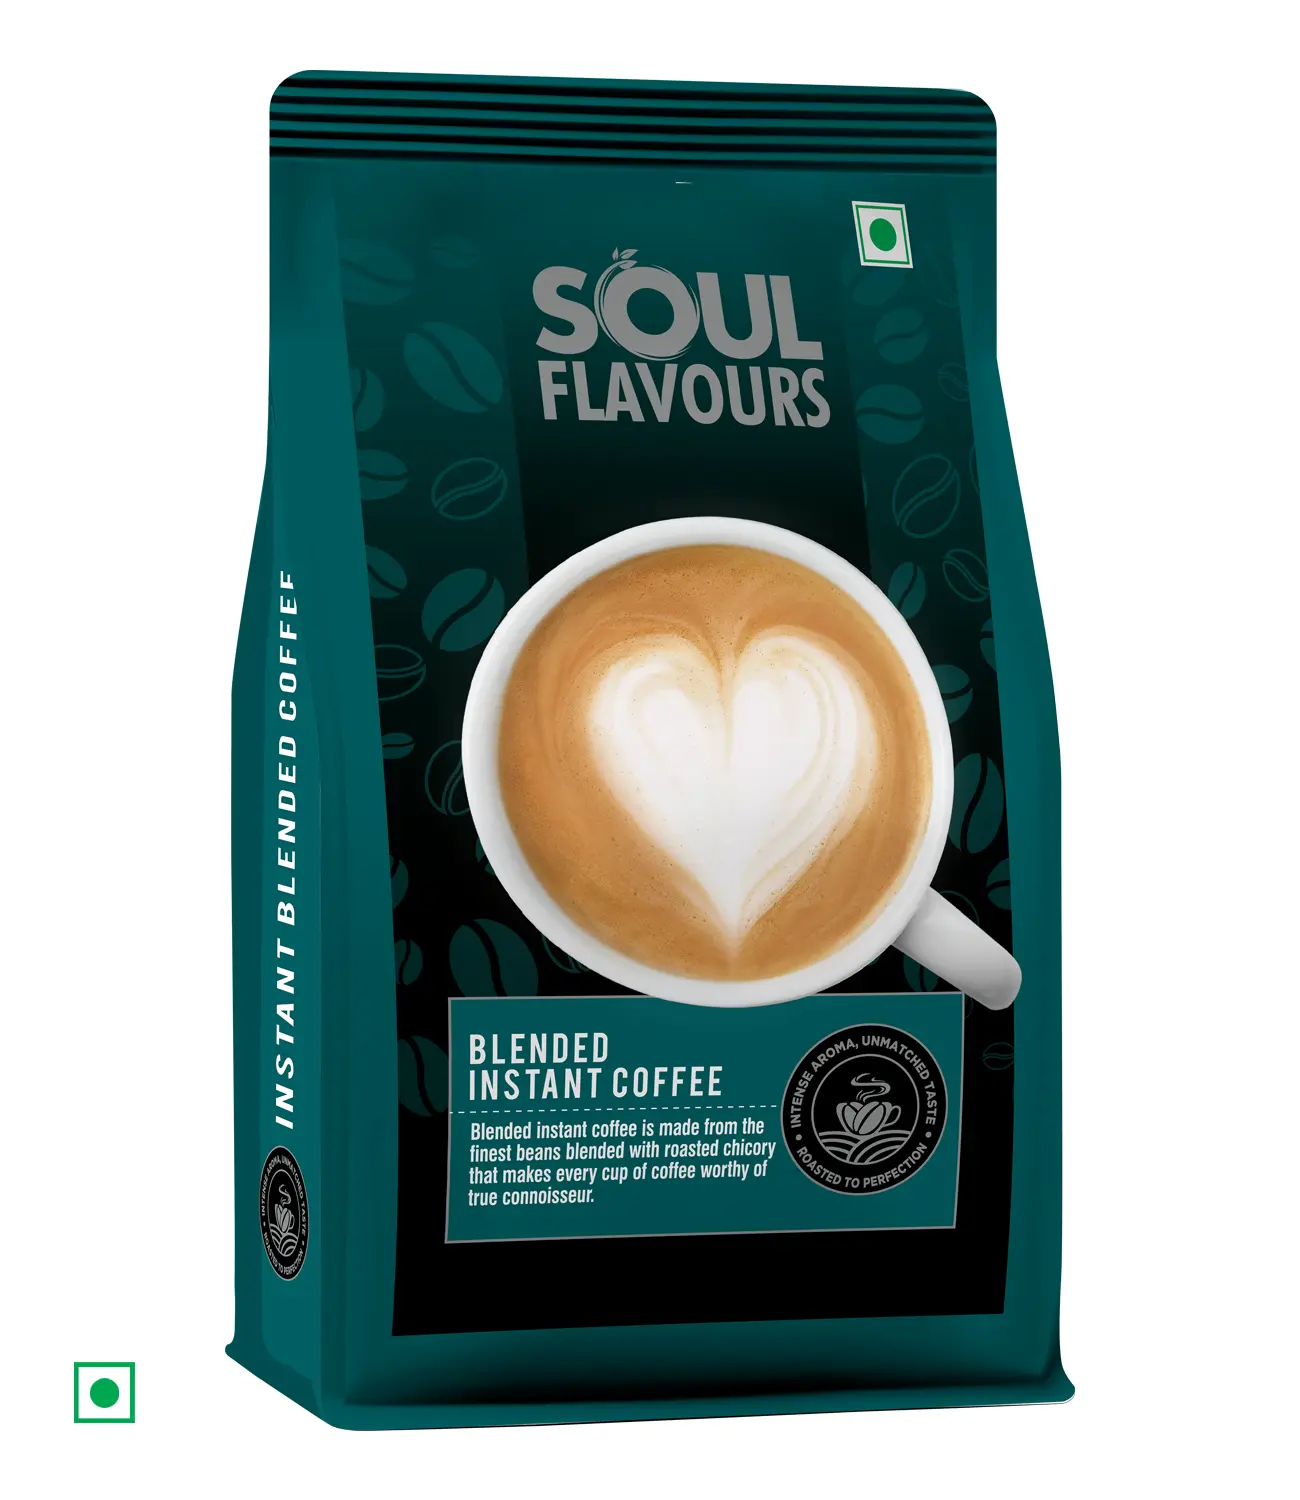 Soul Flavours Blended Instant Coffee